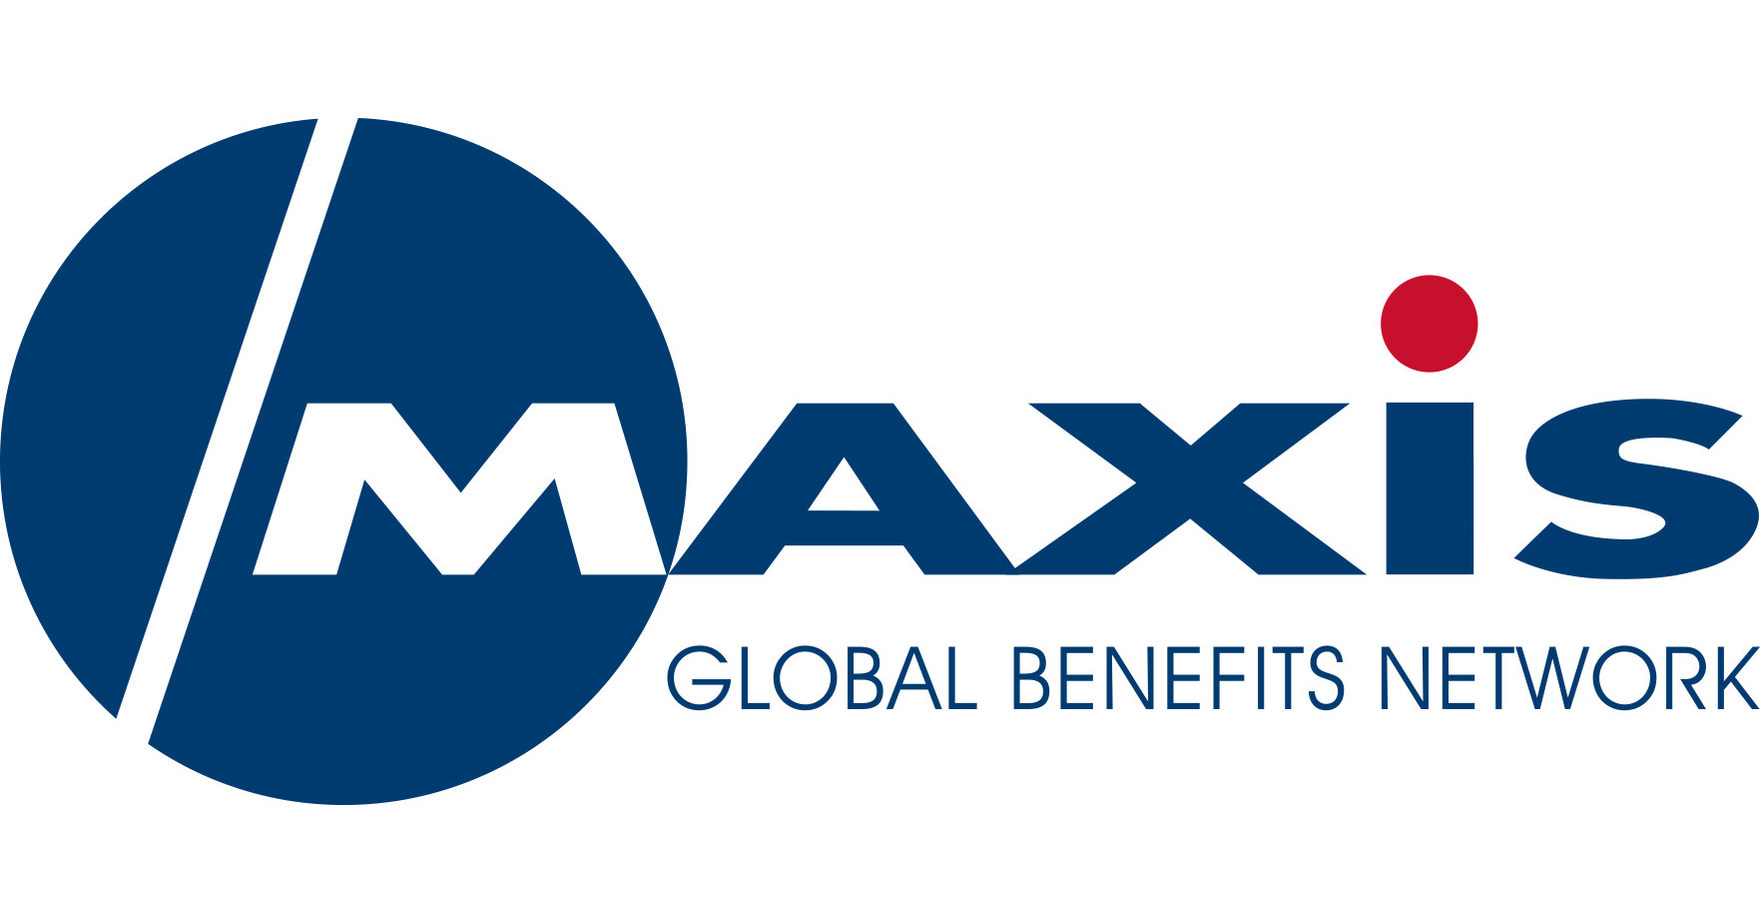 MAXIS GBN selects INTERVENT International as new global wellness partner